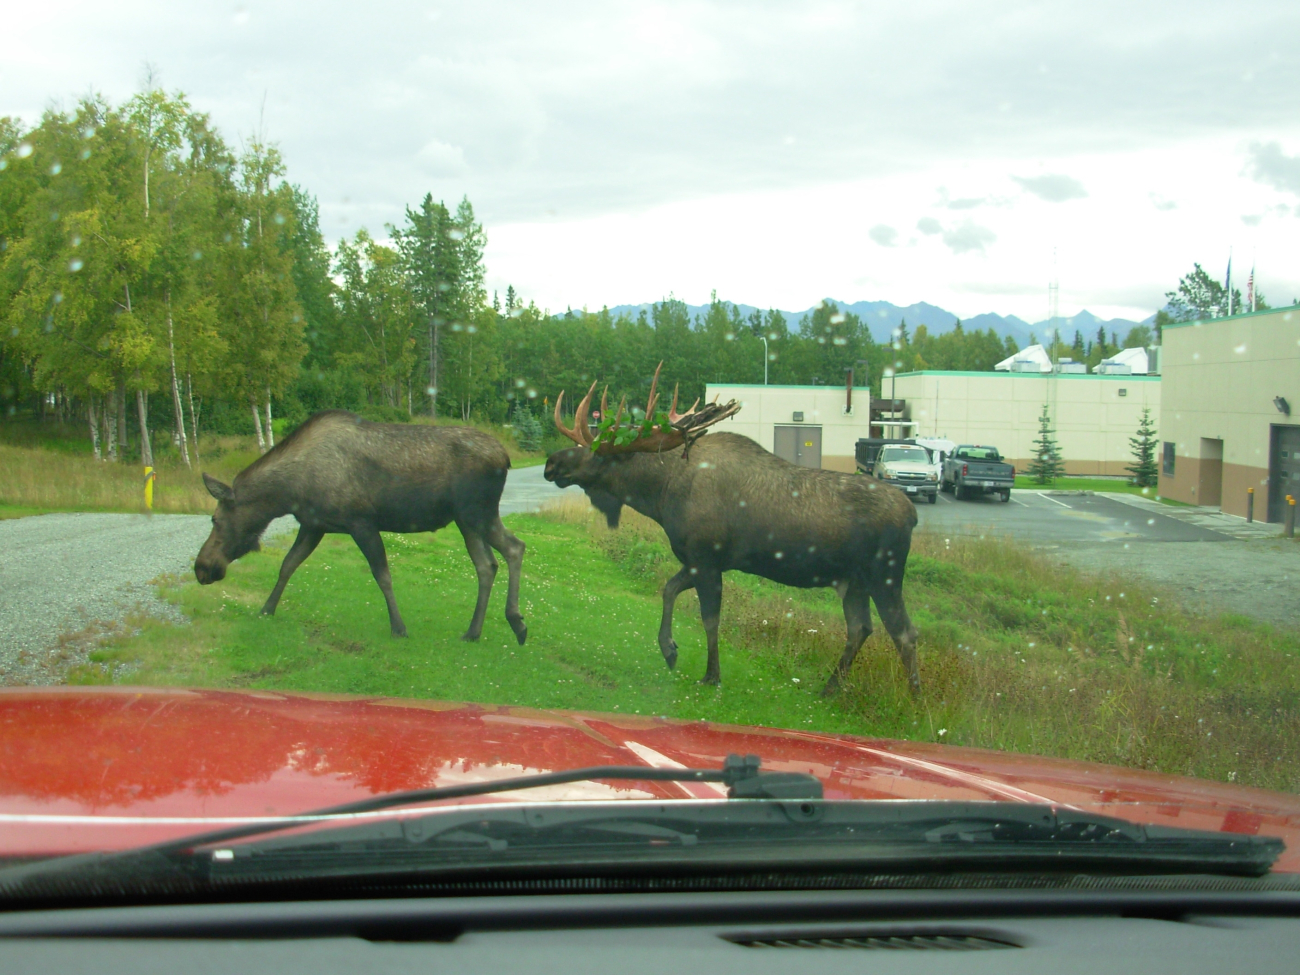 Moose have the right-of-way